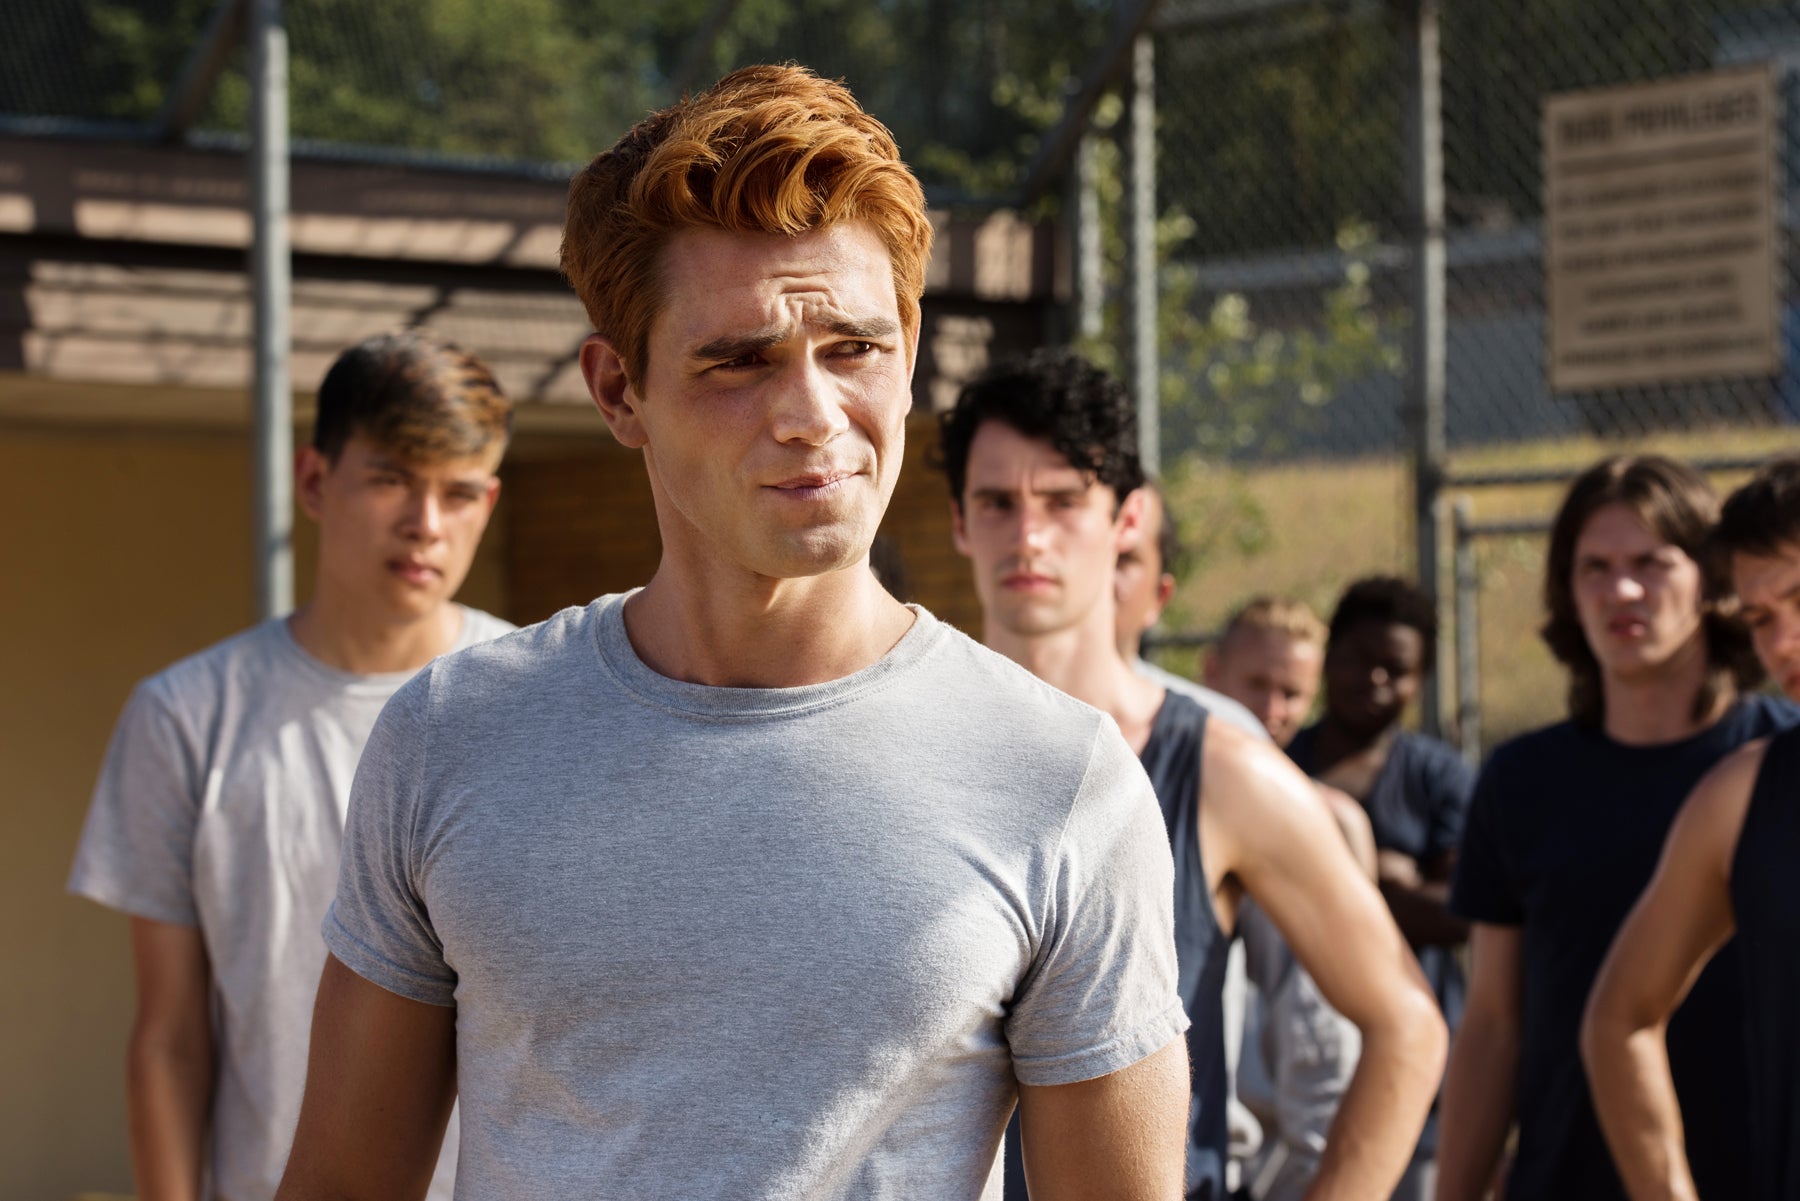 Archie Andrews looks off camera while fellow inmates stand behind him.